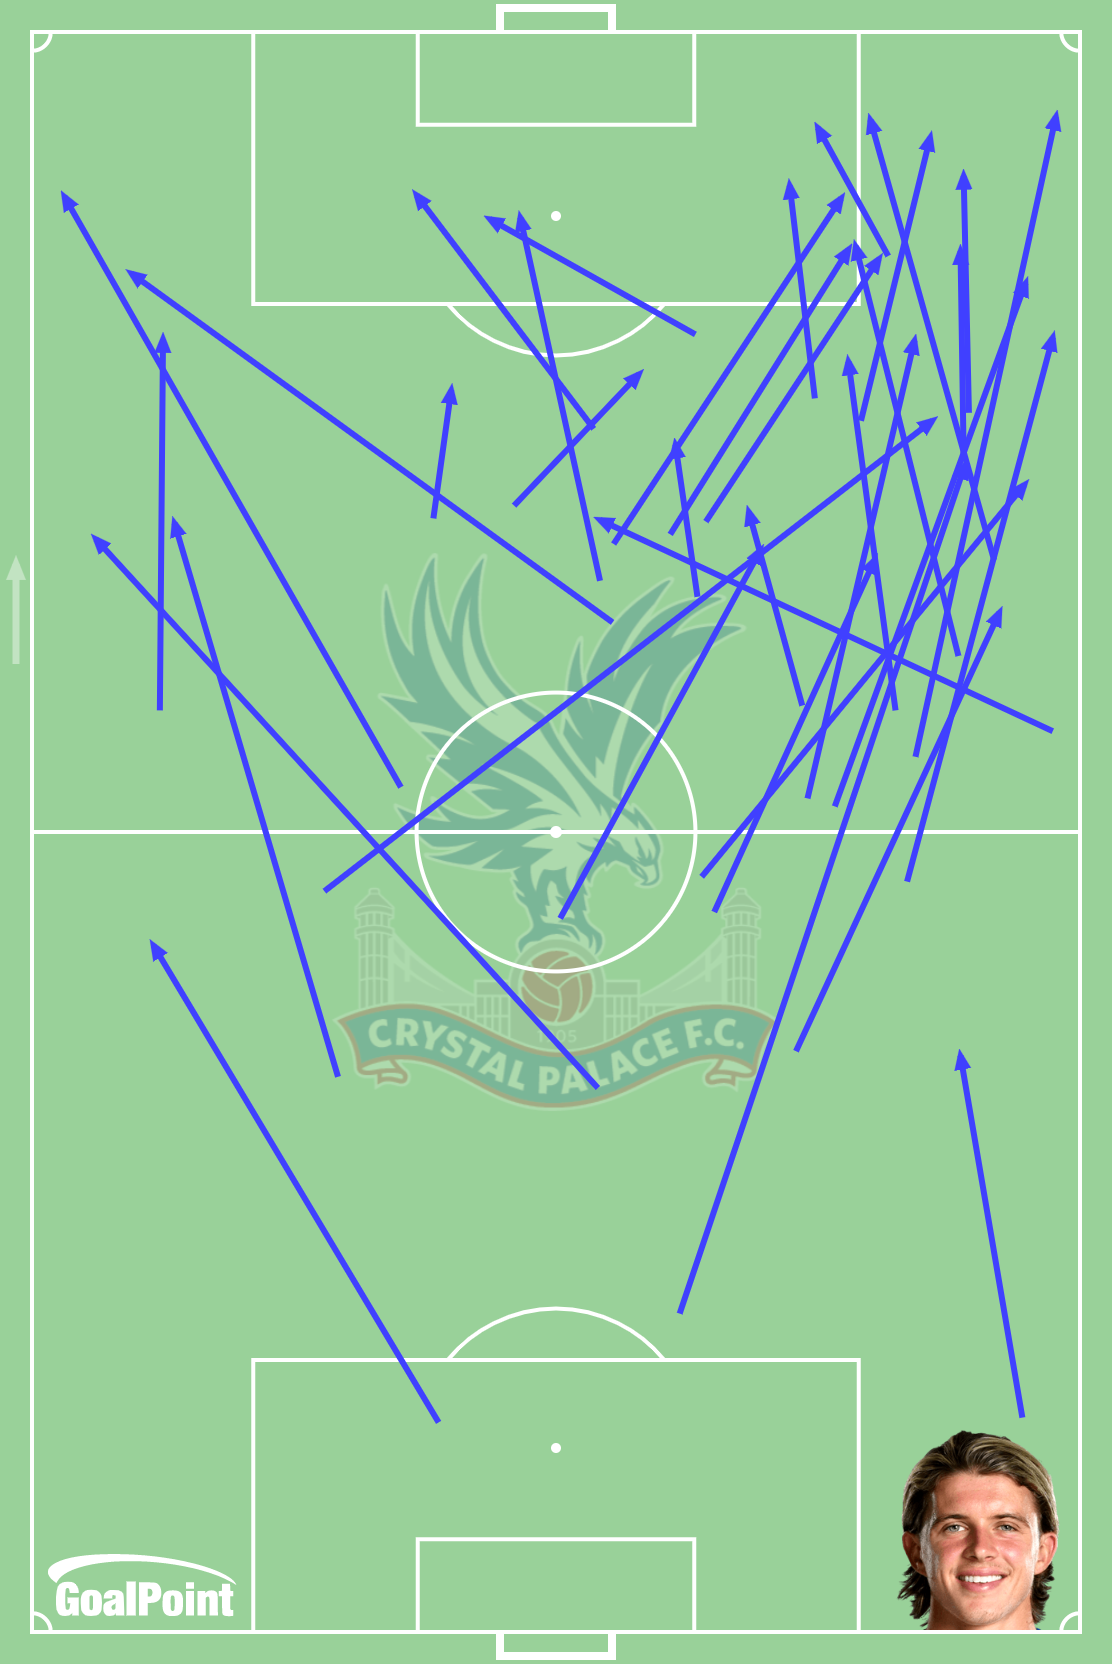 GoalPoint-Conor-Gallagher-Crystal-Palace-Approach-Passes-J17-EPL-202122